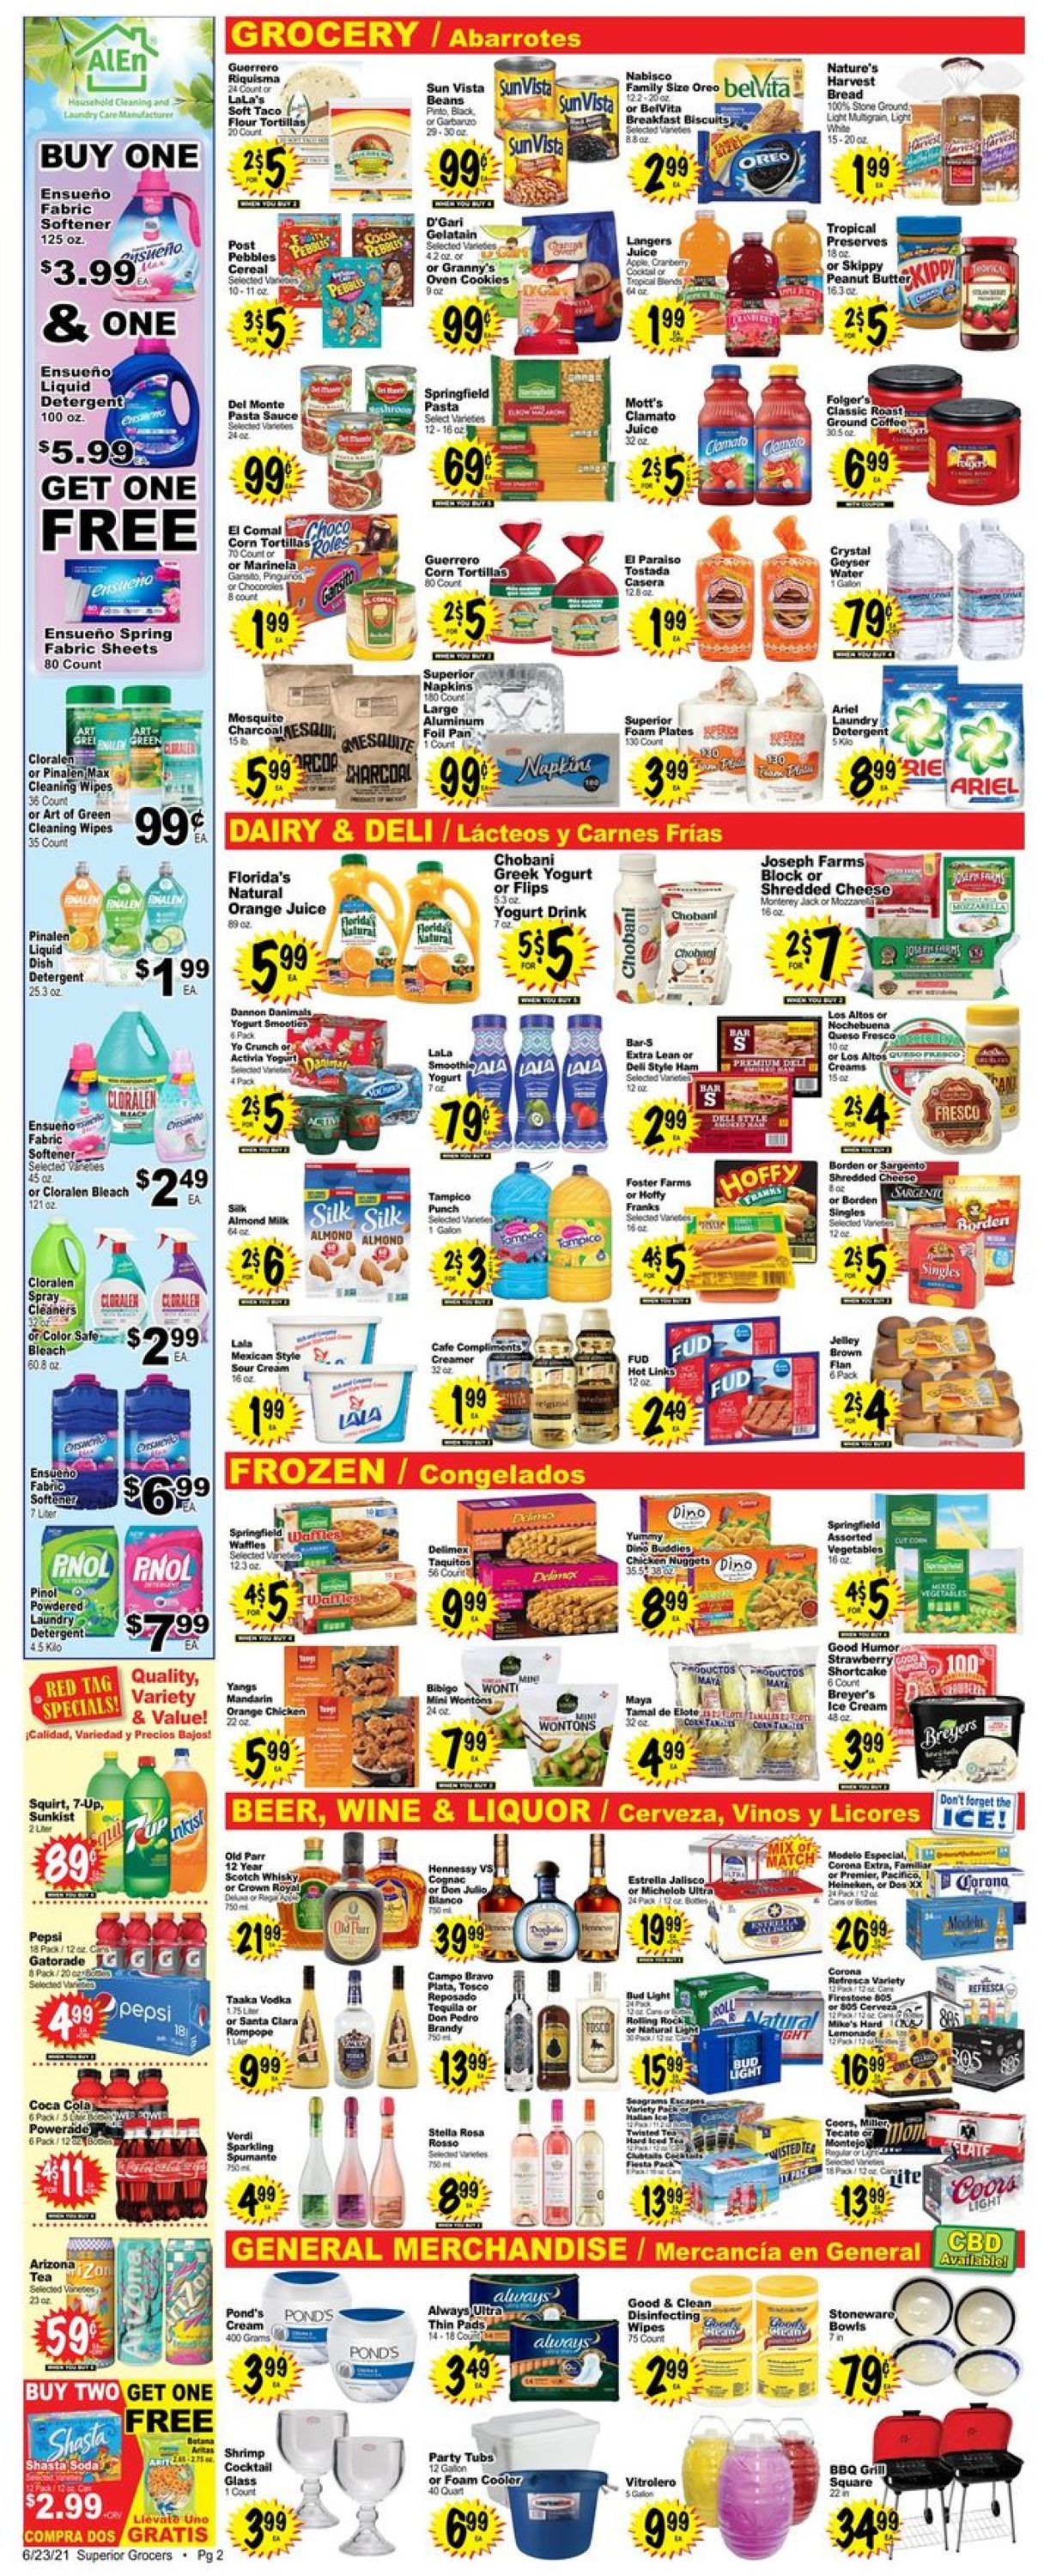 Catalogue Superior Grocers from 06/23/2021